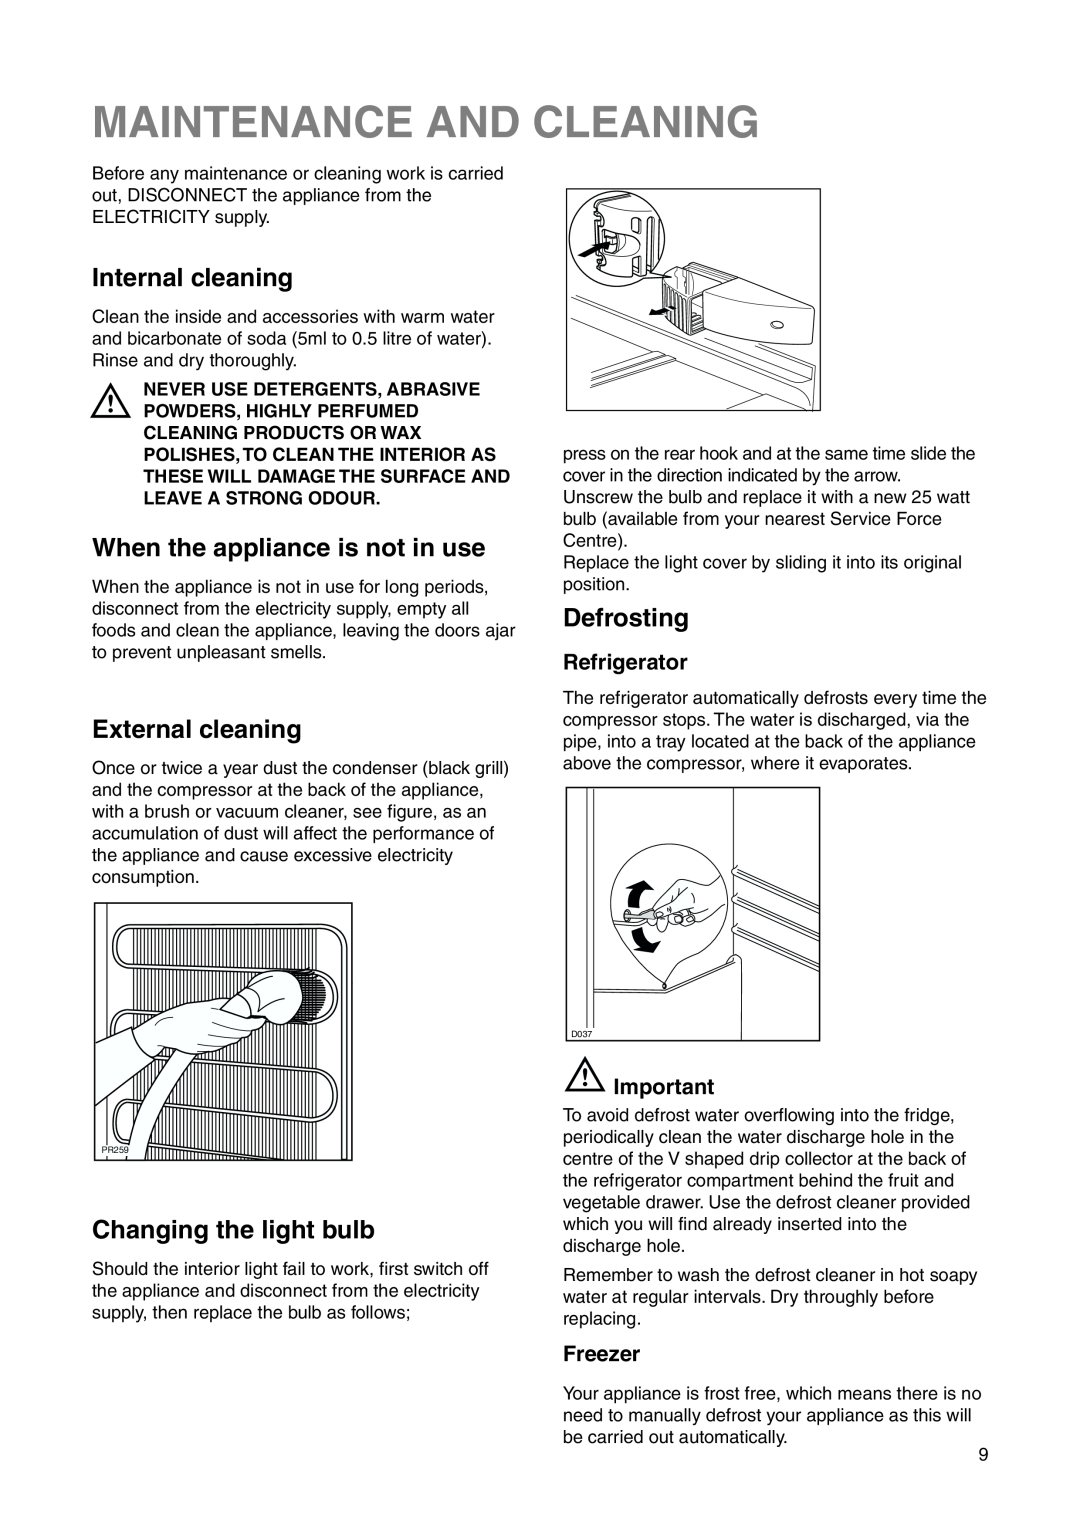 Electrolux ERF 2831 manual Maintenance And Cleaning, Internal cleaning, When the appliance is not in use, External cleaning 